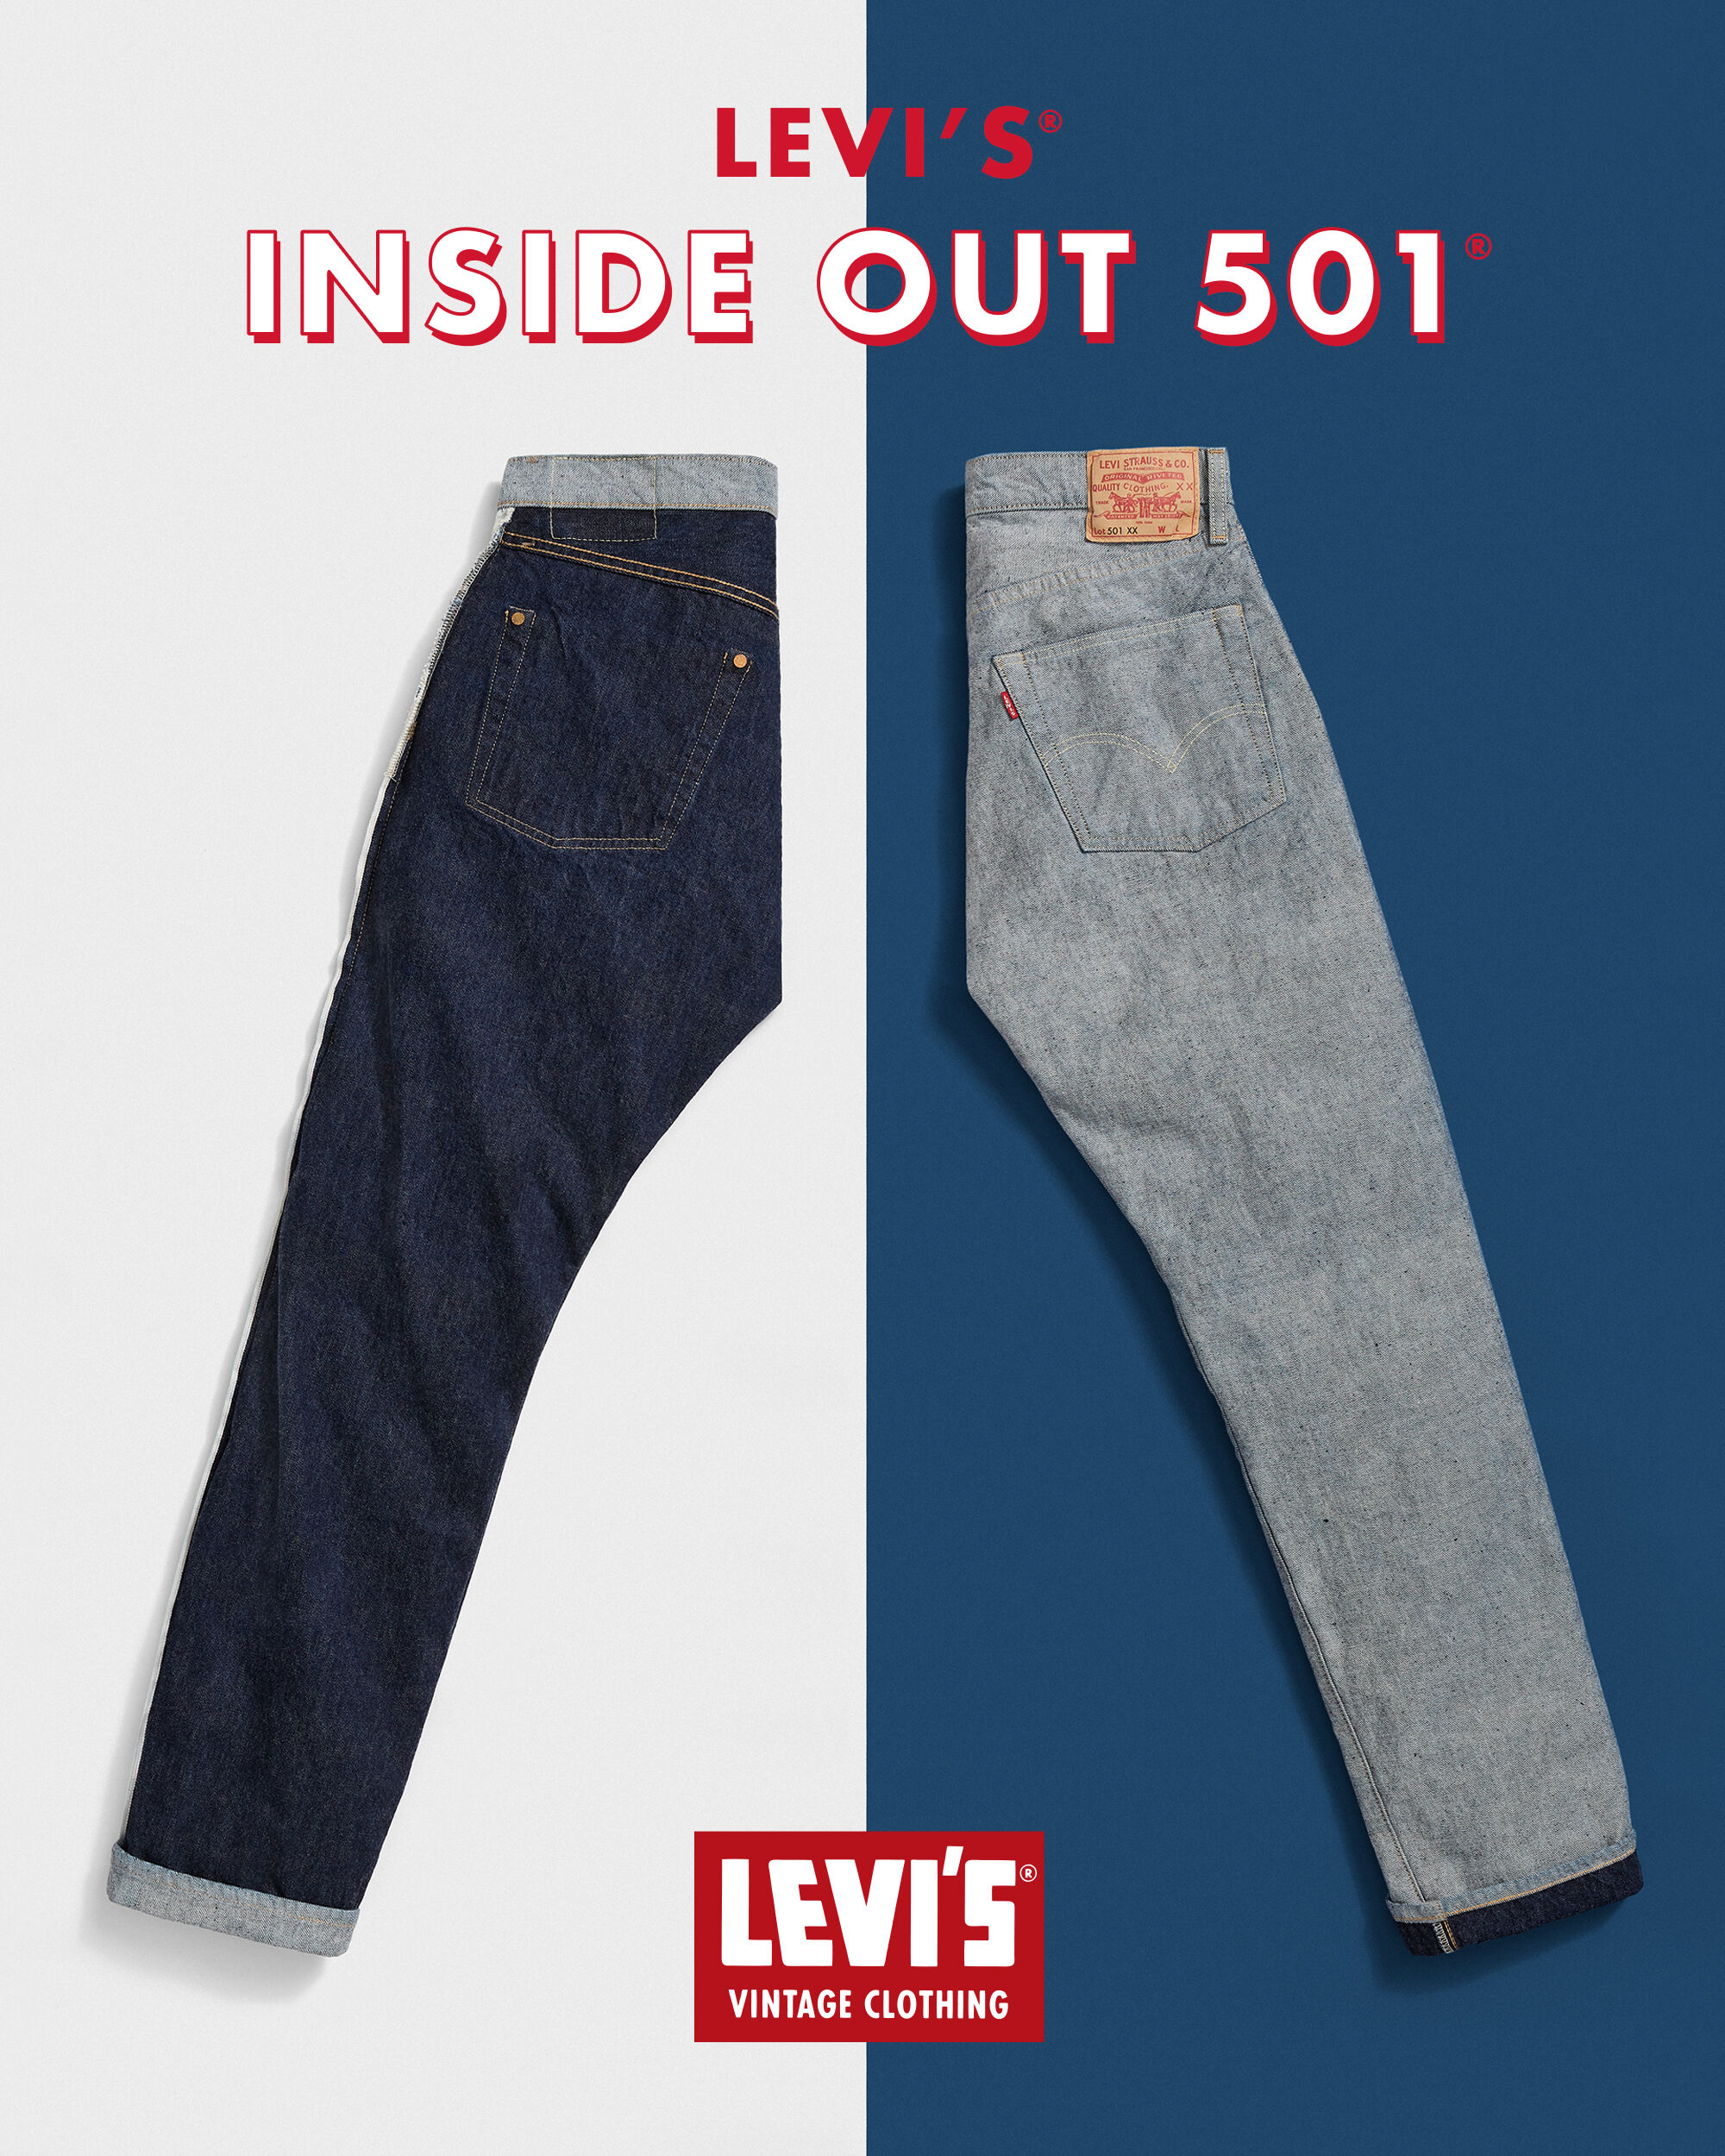 LIMITED EDITIONLEVI'S® VINTAGE CLOTHING INSIDE OUT 501 ...